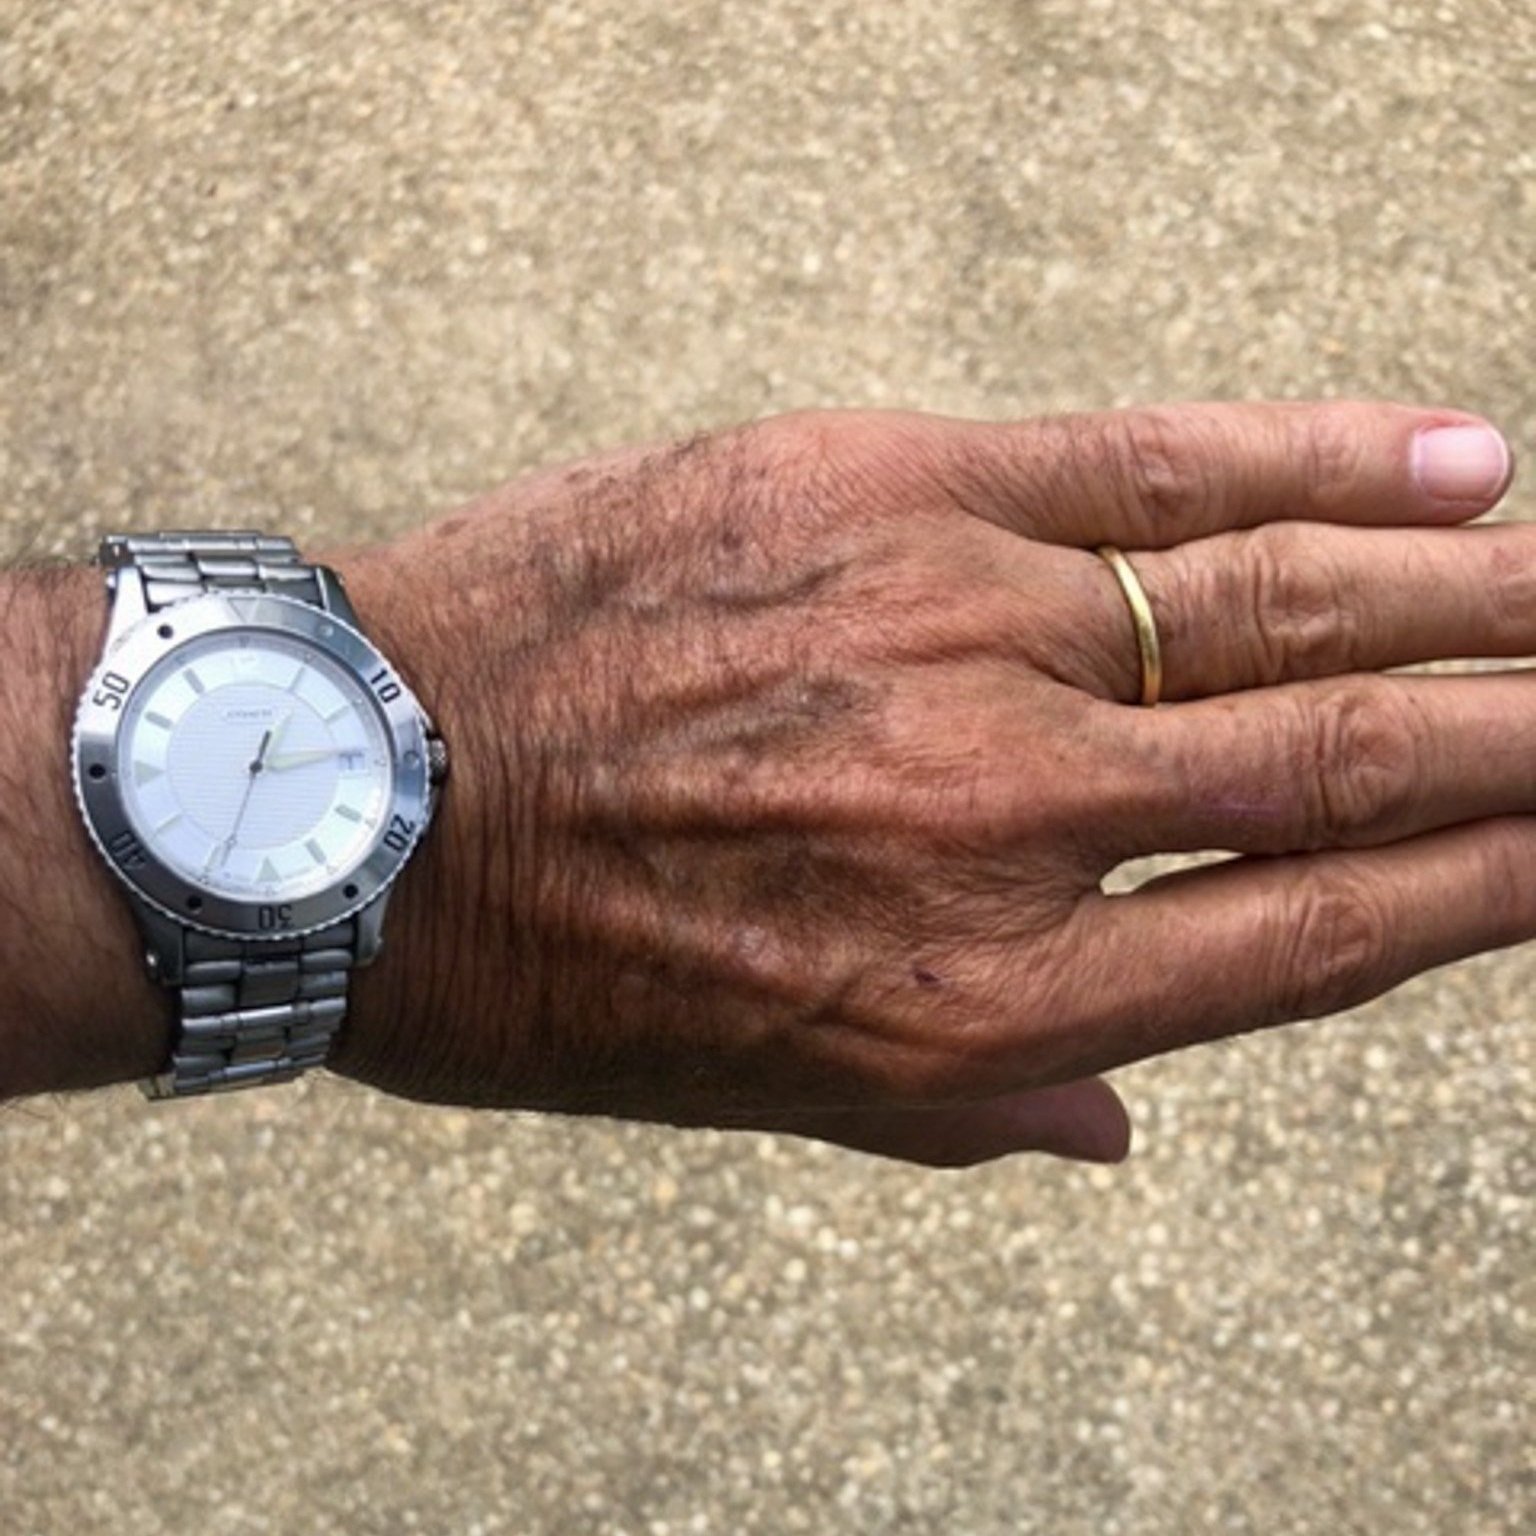 Bob's everyday jewelry, his watch and wedding ring